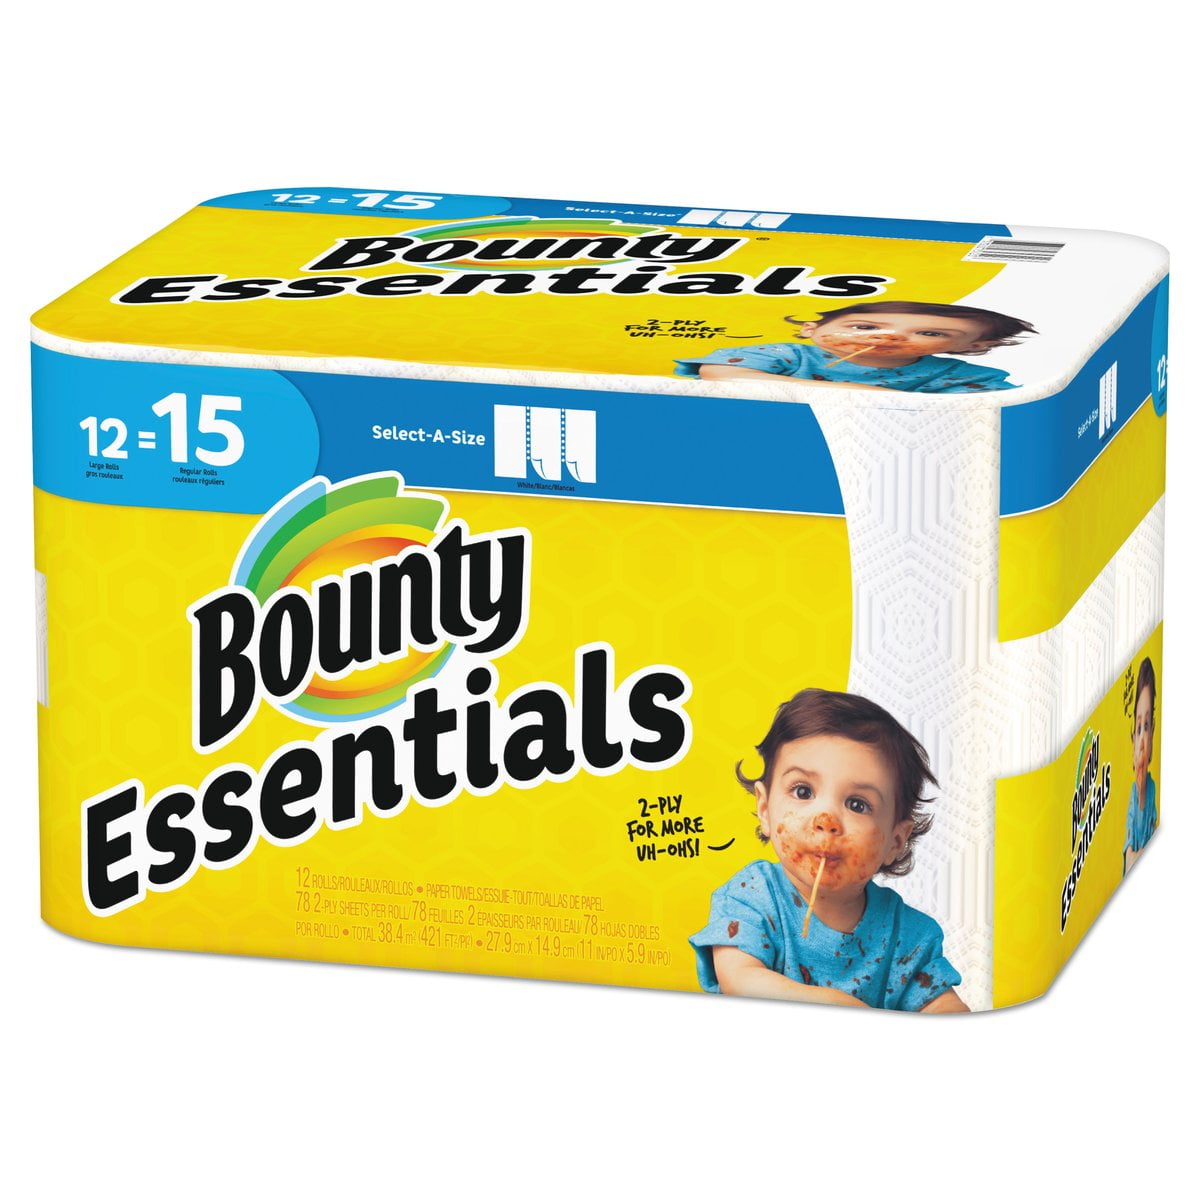 BOUNTY ESSENTIALS SELECT WHITE SHEETS PAPER TOWELS*40 SHEETS*2-PLY.....1 ROLL 